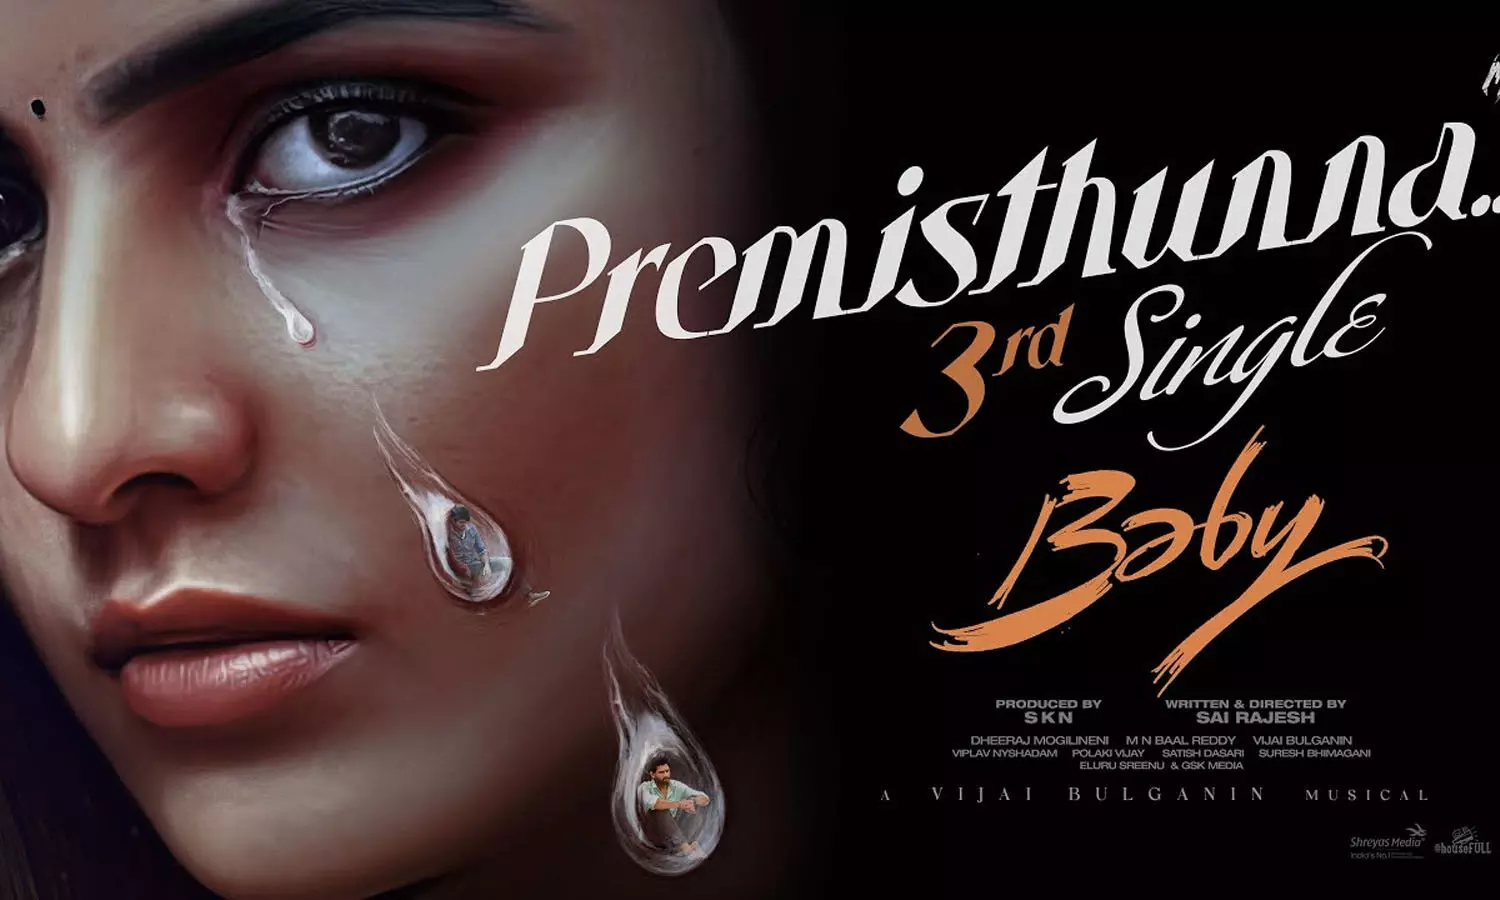 Lyrical Video: Premisthunna from Baby is another instant chartbuster